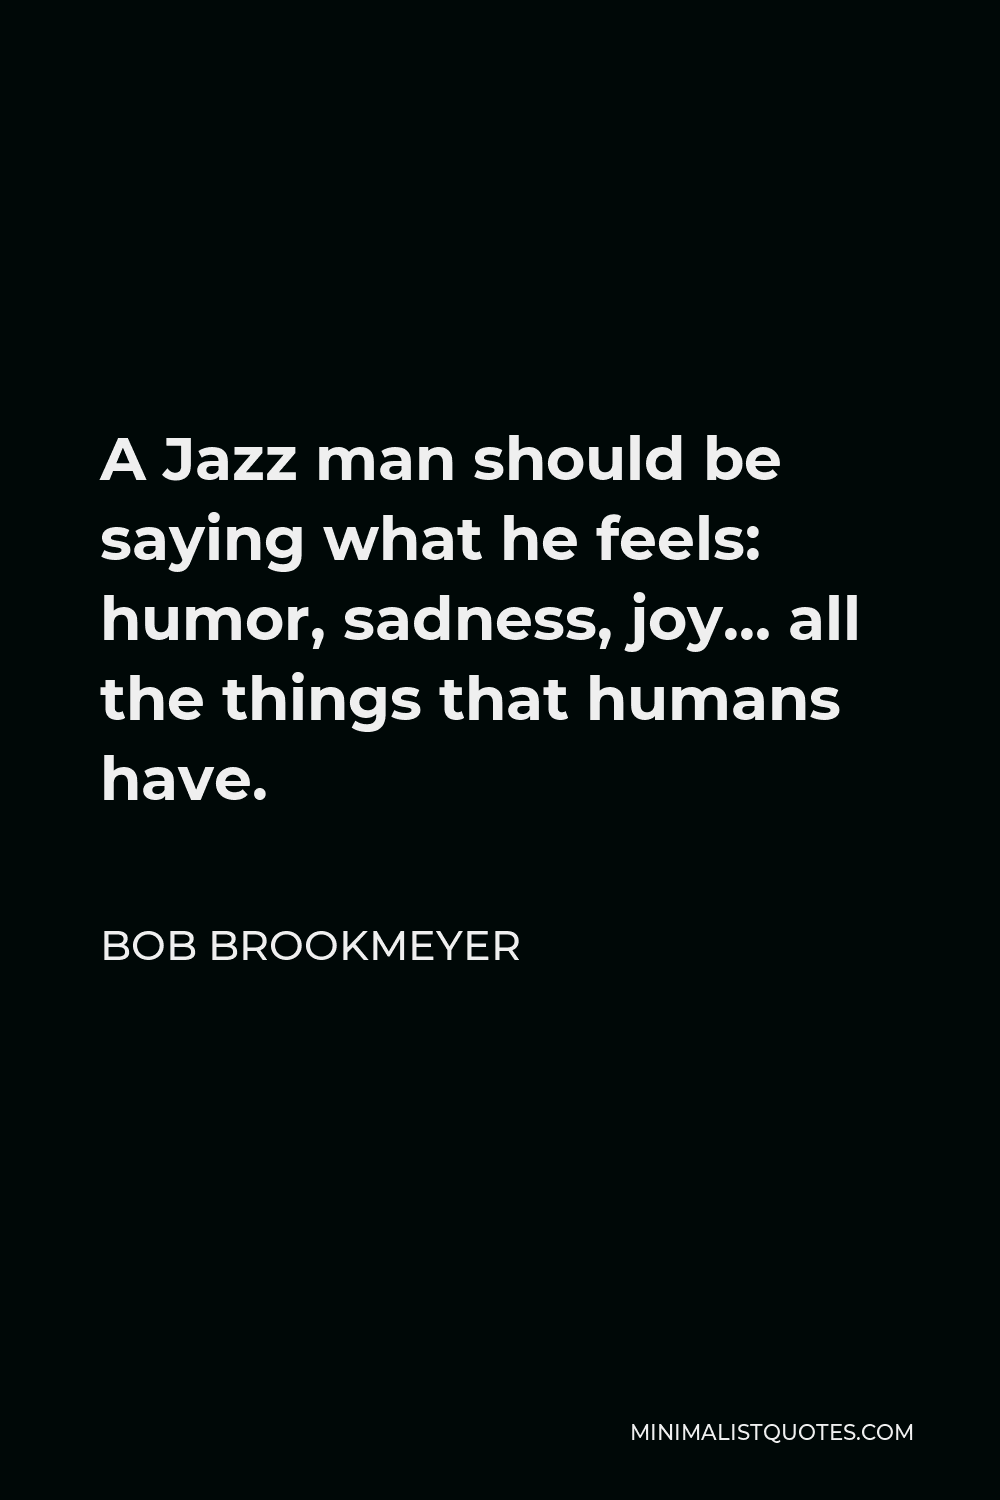 Bob Brookmeyer Quote - A Jazz man should be saying what he feels: humor, sadness, joy… all the things that humans have.